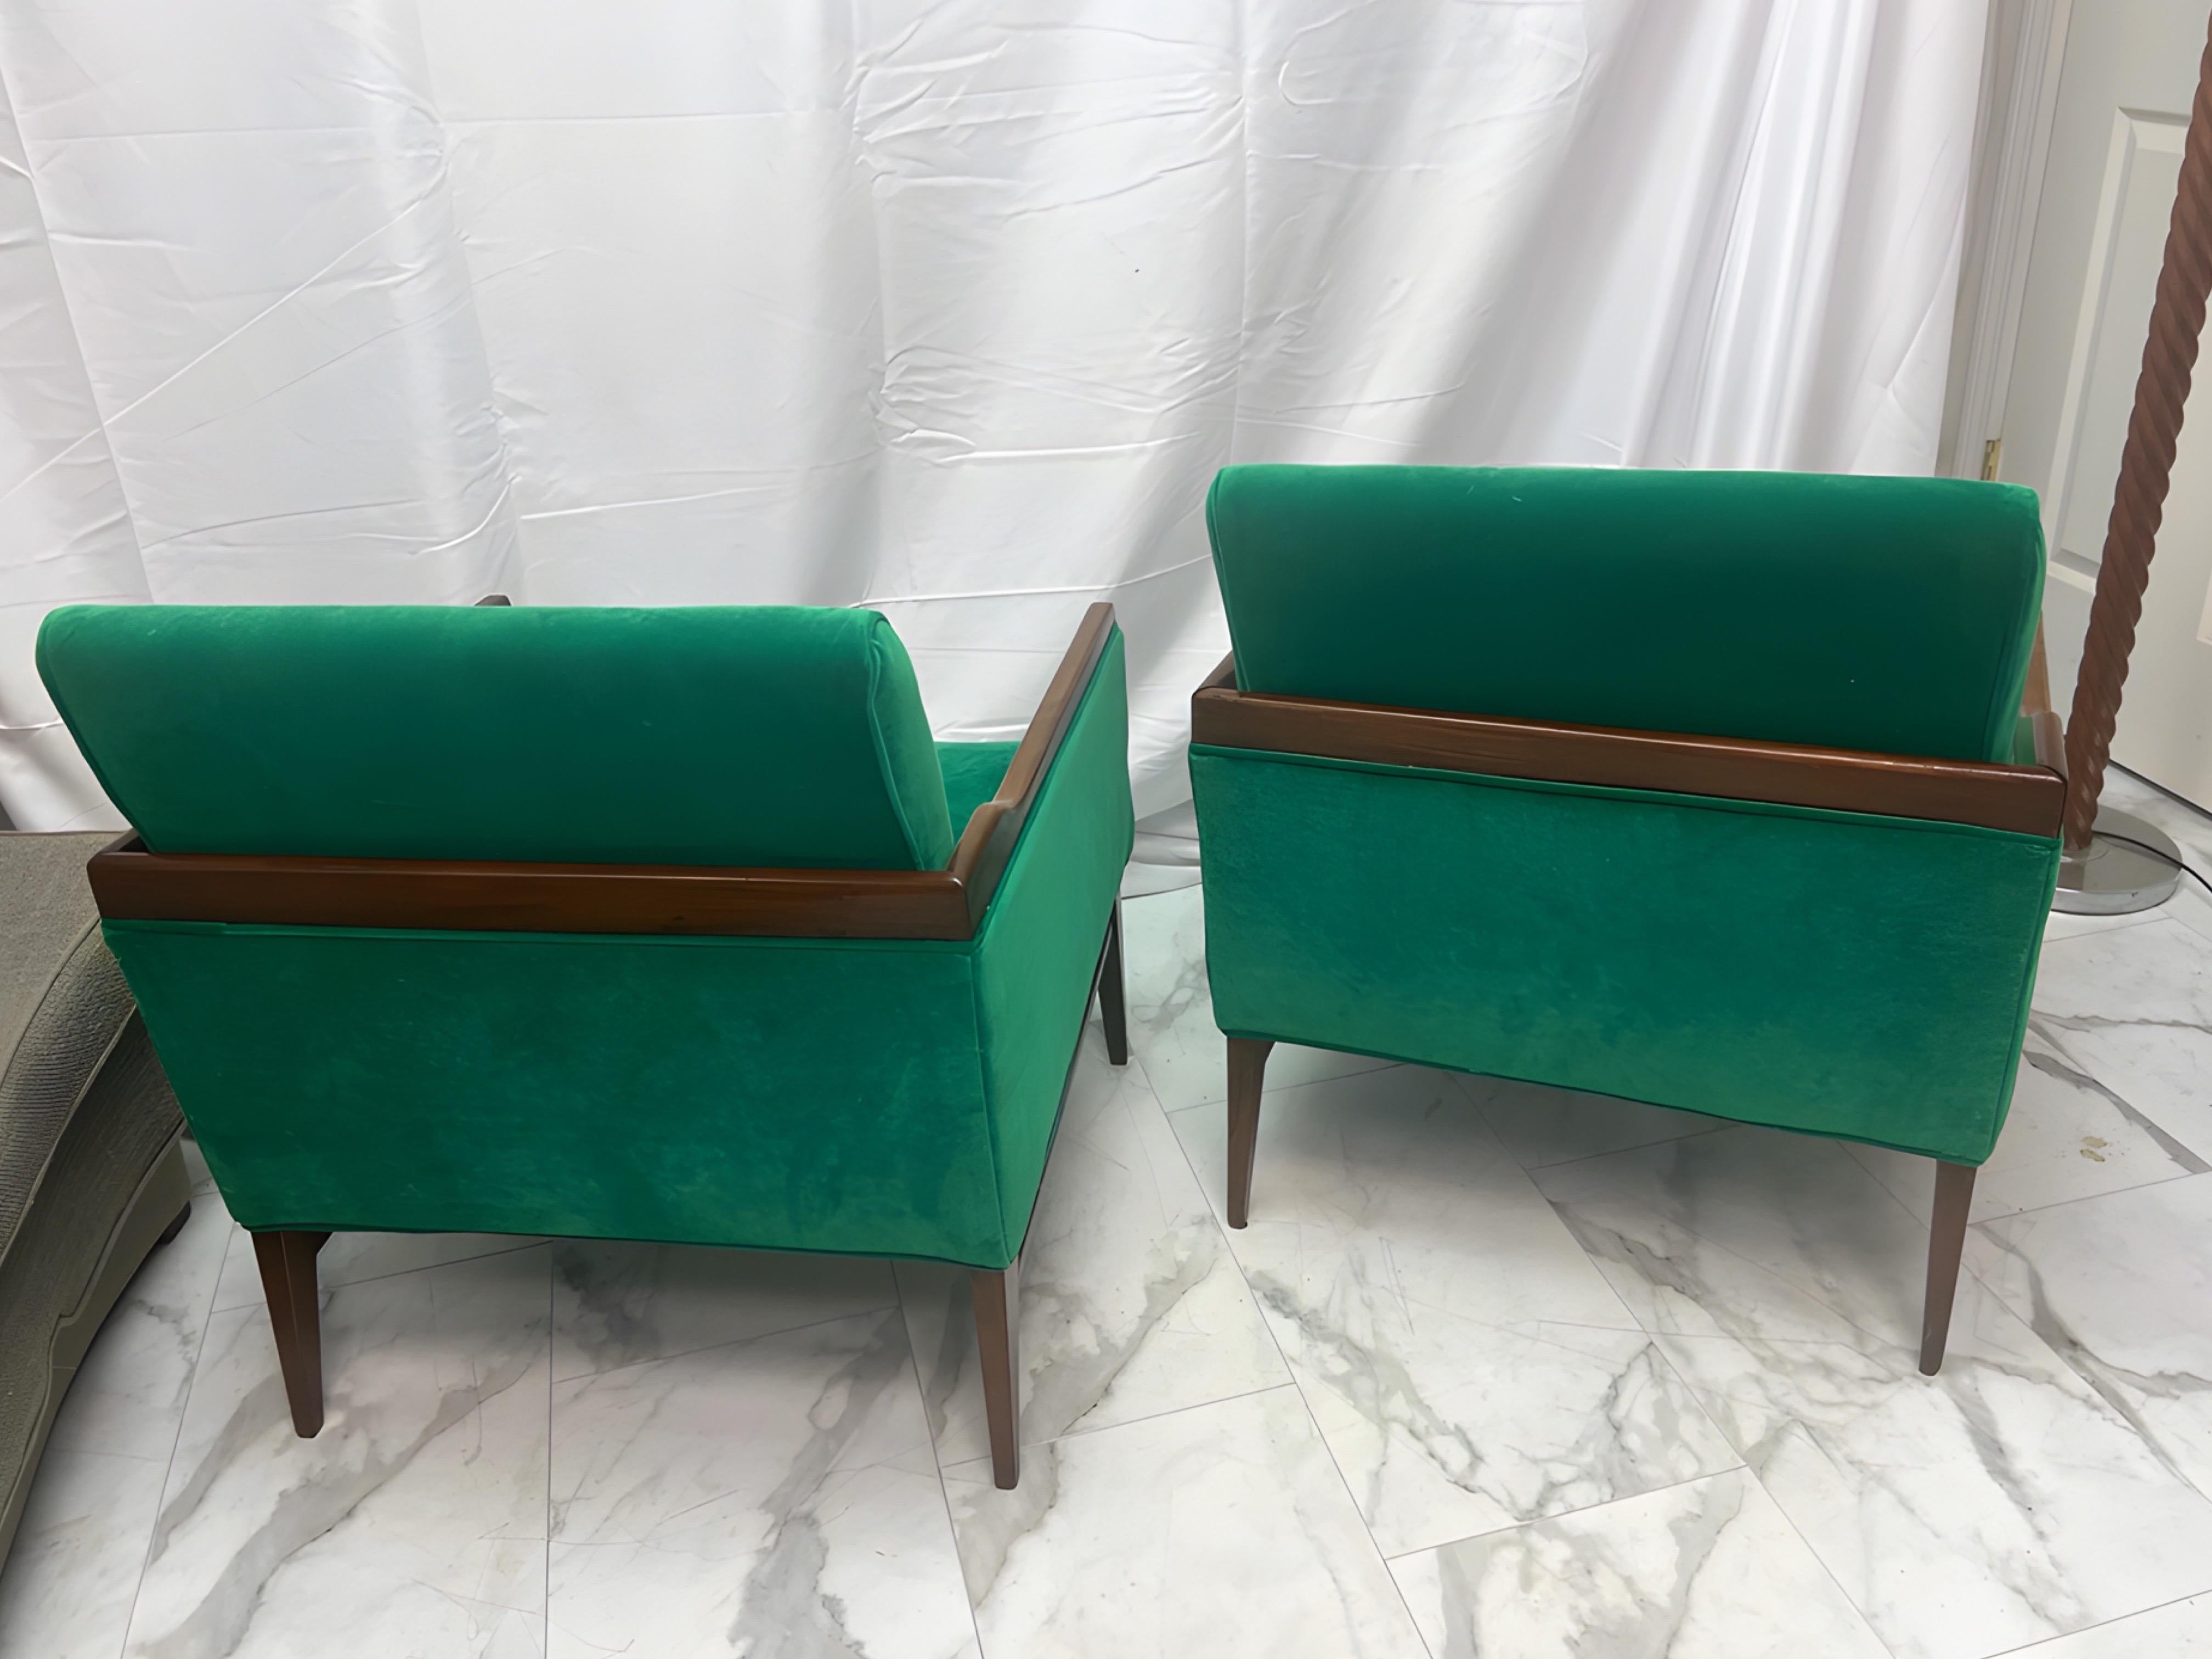 1950’s Walnut and Green Velvet Low Profile Chairs - a Pair For Sale 3